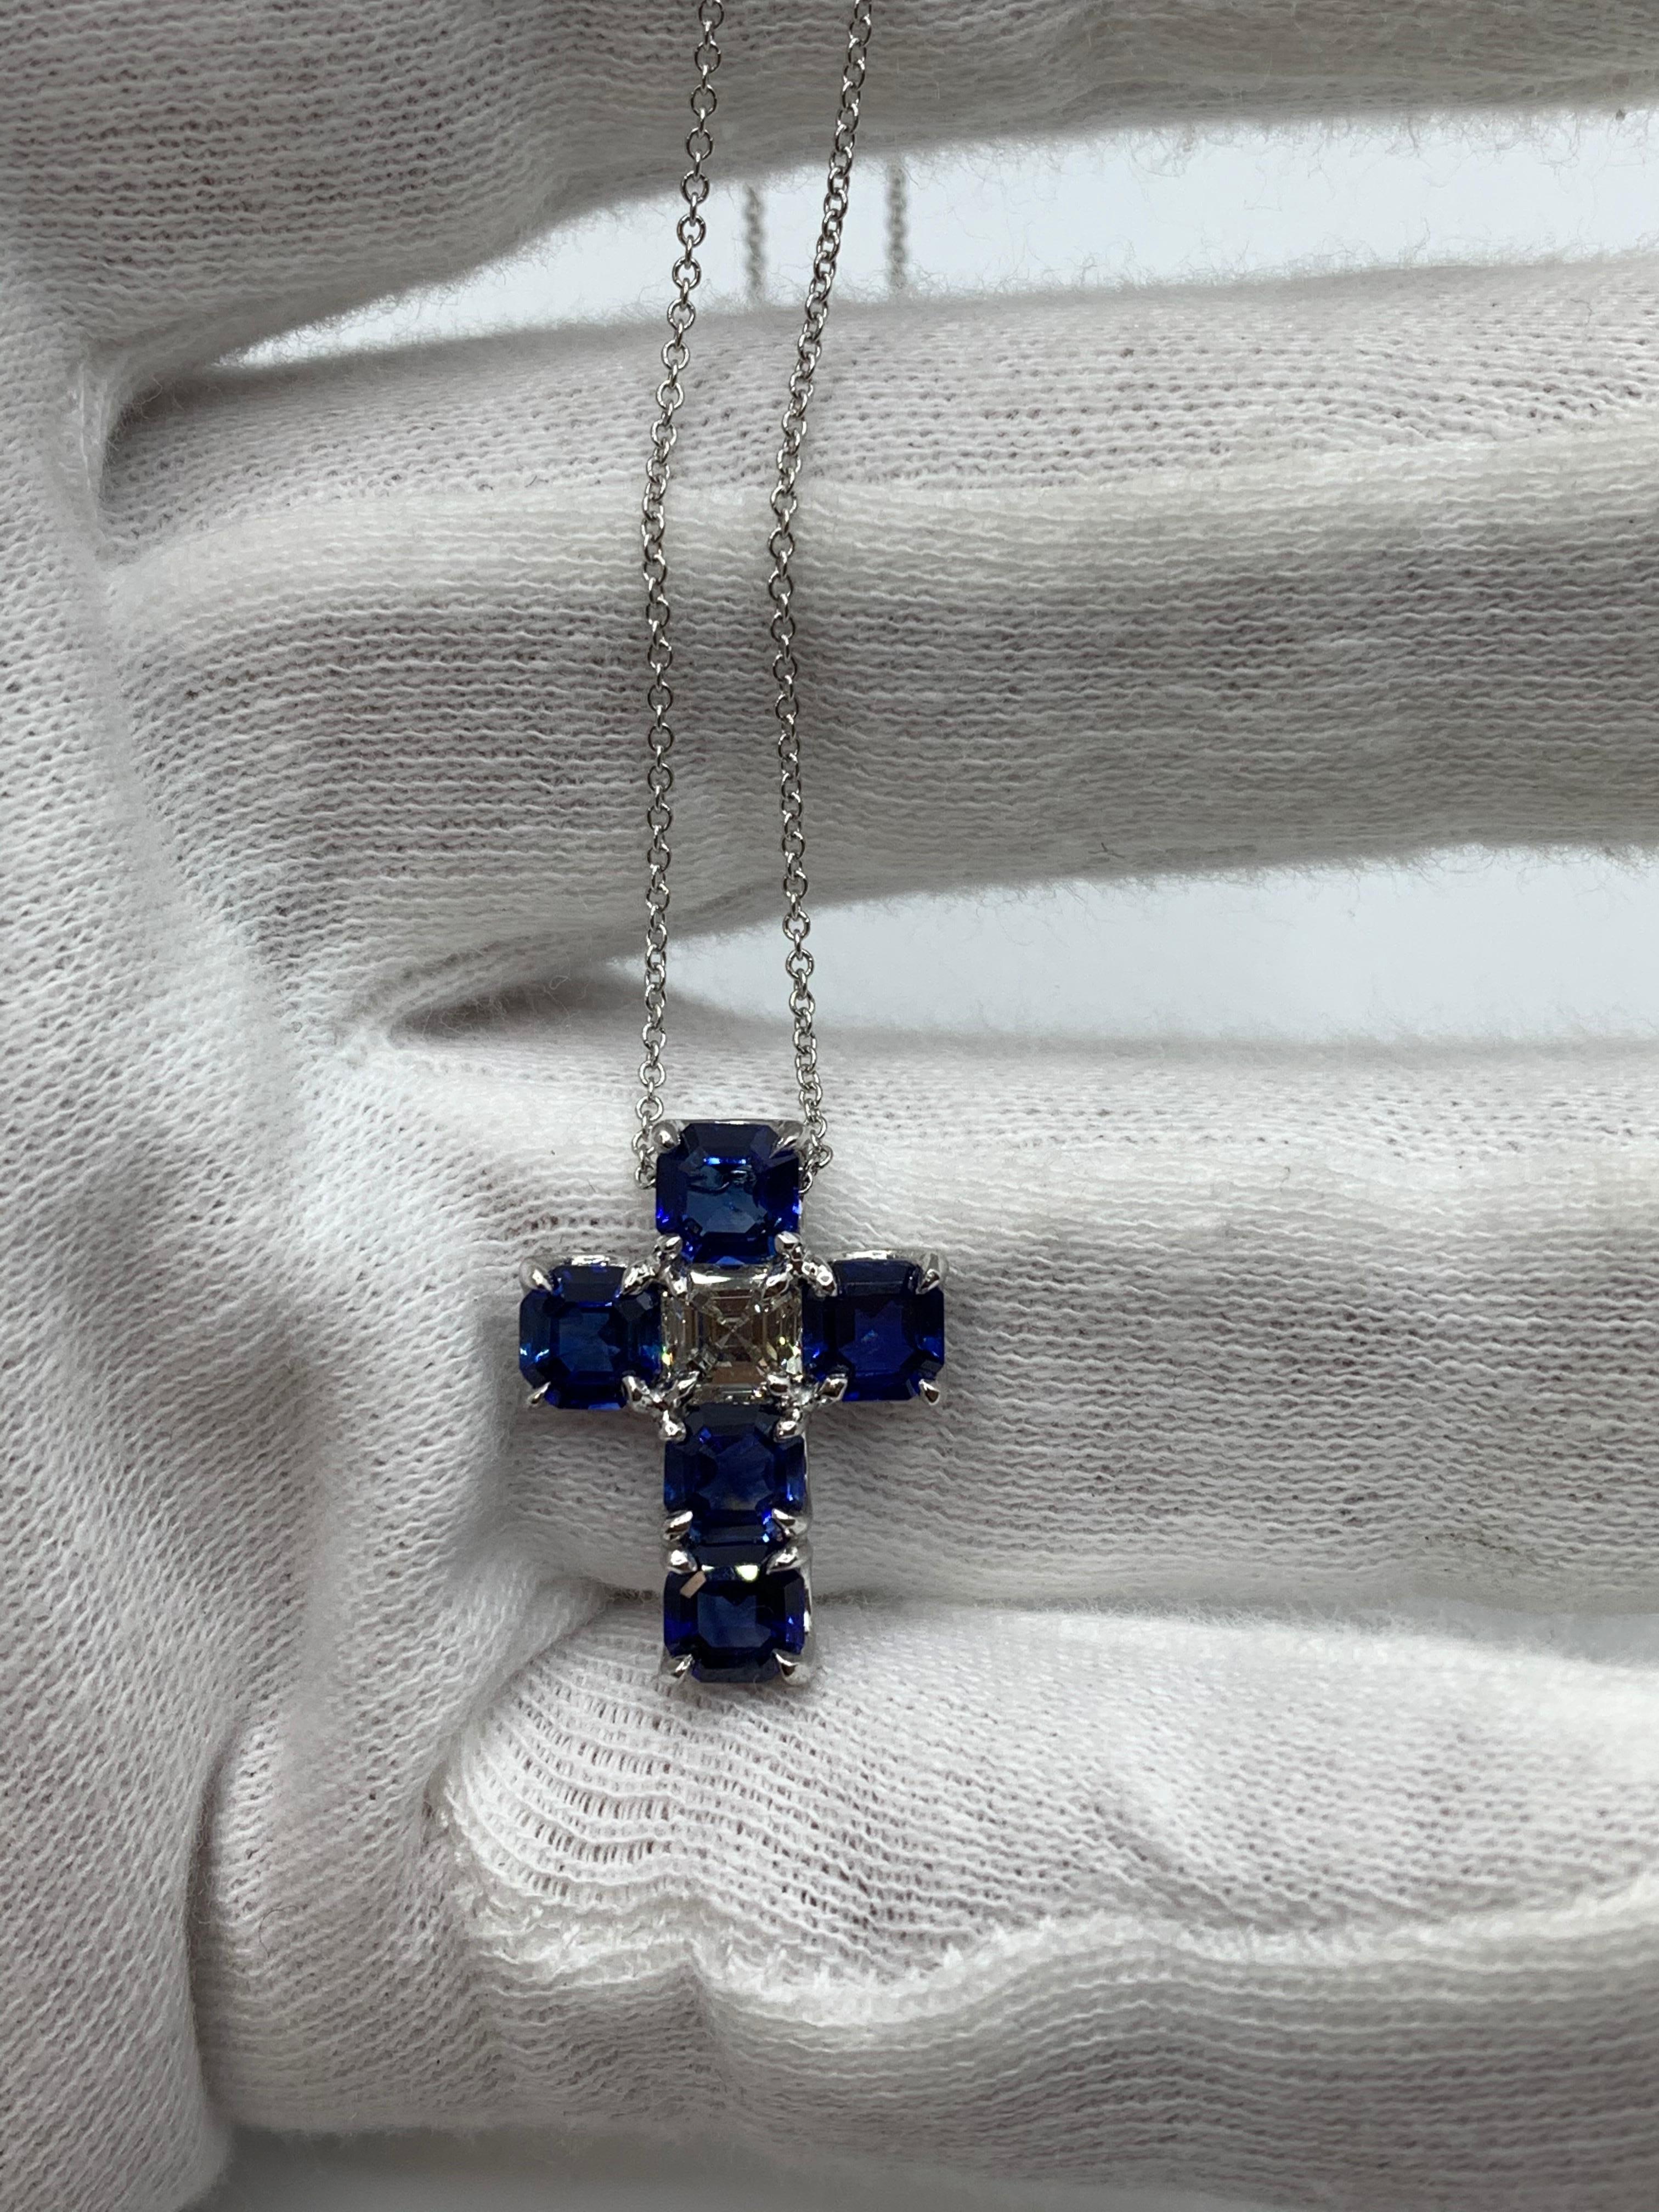 CushionCut Sapphires and White Cushion Cut Diamond set in this beautiful and minimalistic Cross. Set with very little metal to allow light to pass from all angles for maximum brilliance.
5 Sapphires weighing 4.03 Carat.
1 Diamond Weighing 0.72